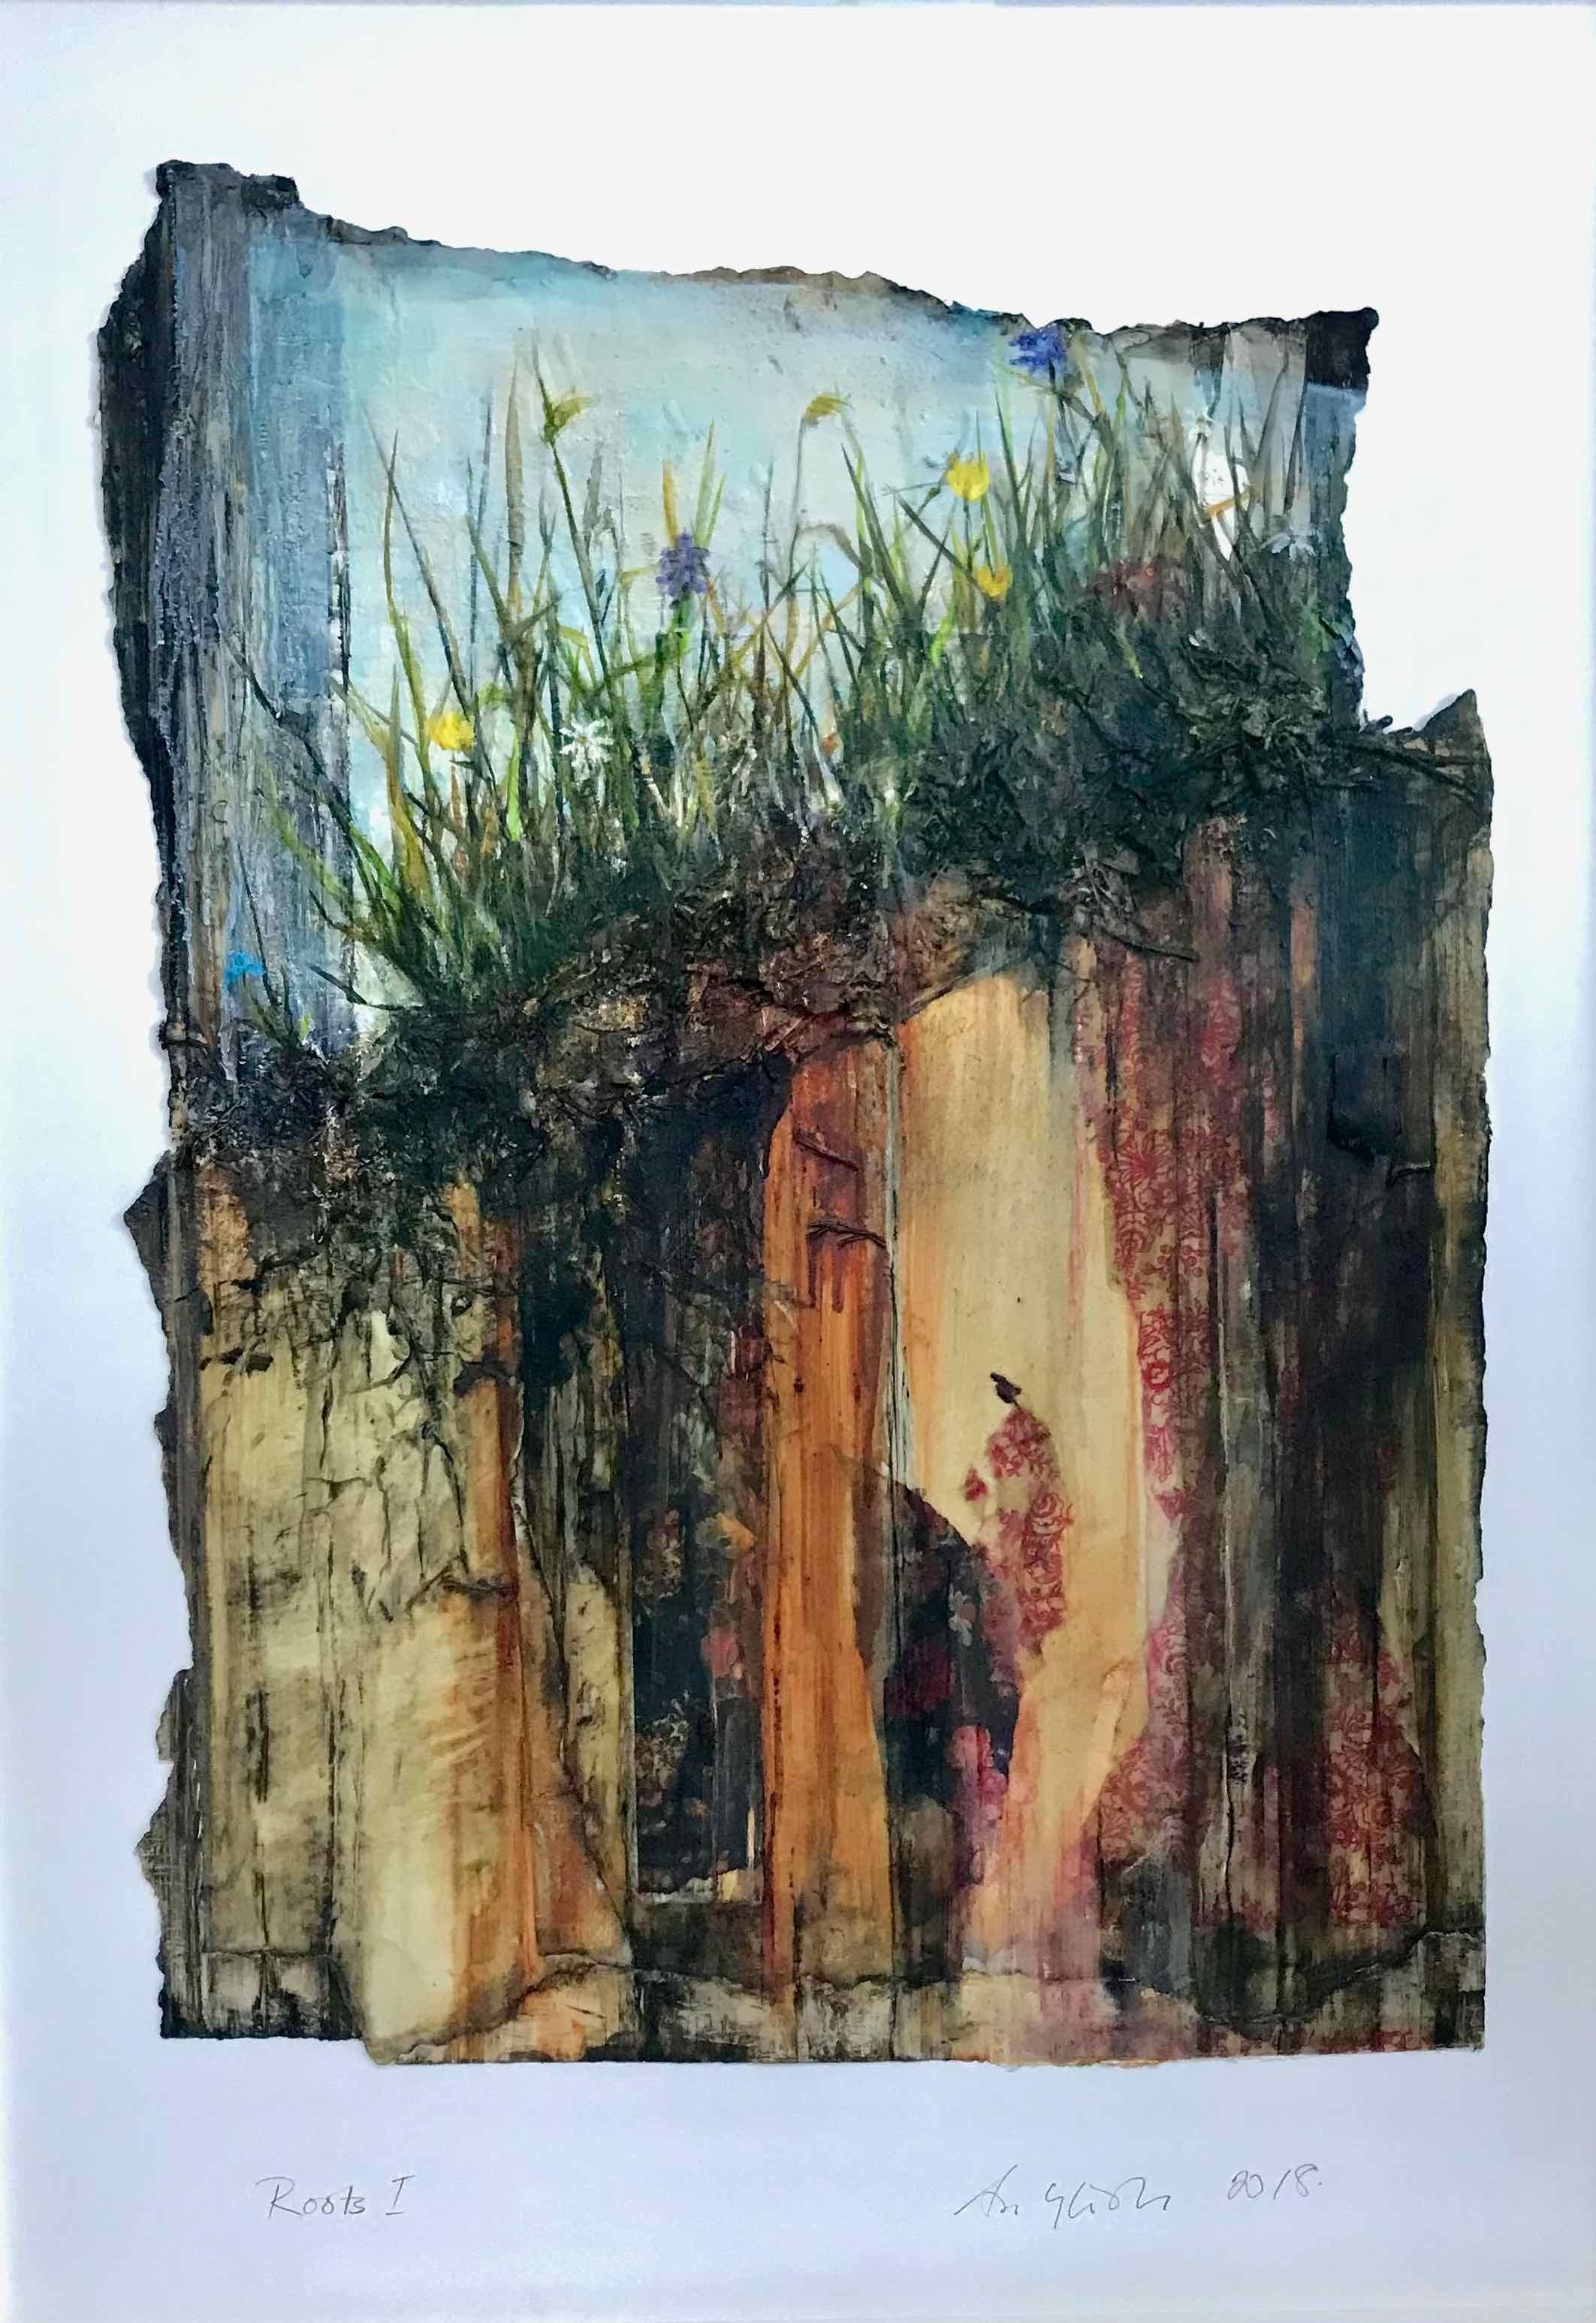 Roots I, Swedish Landscape and Plant Painting by Ann-Helen English - Mixed Media Art by Ann Helen English